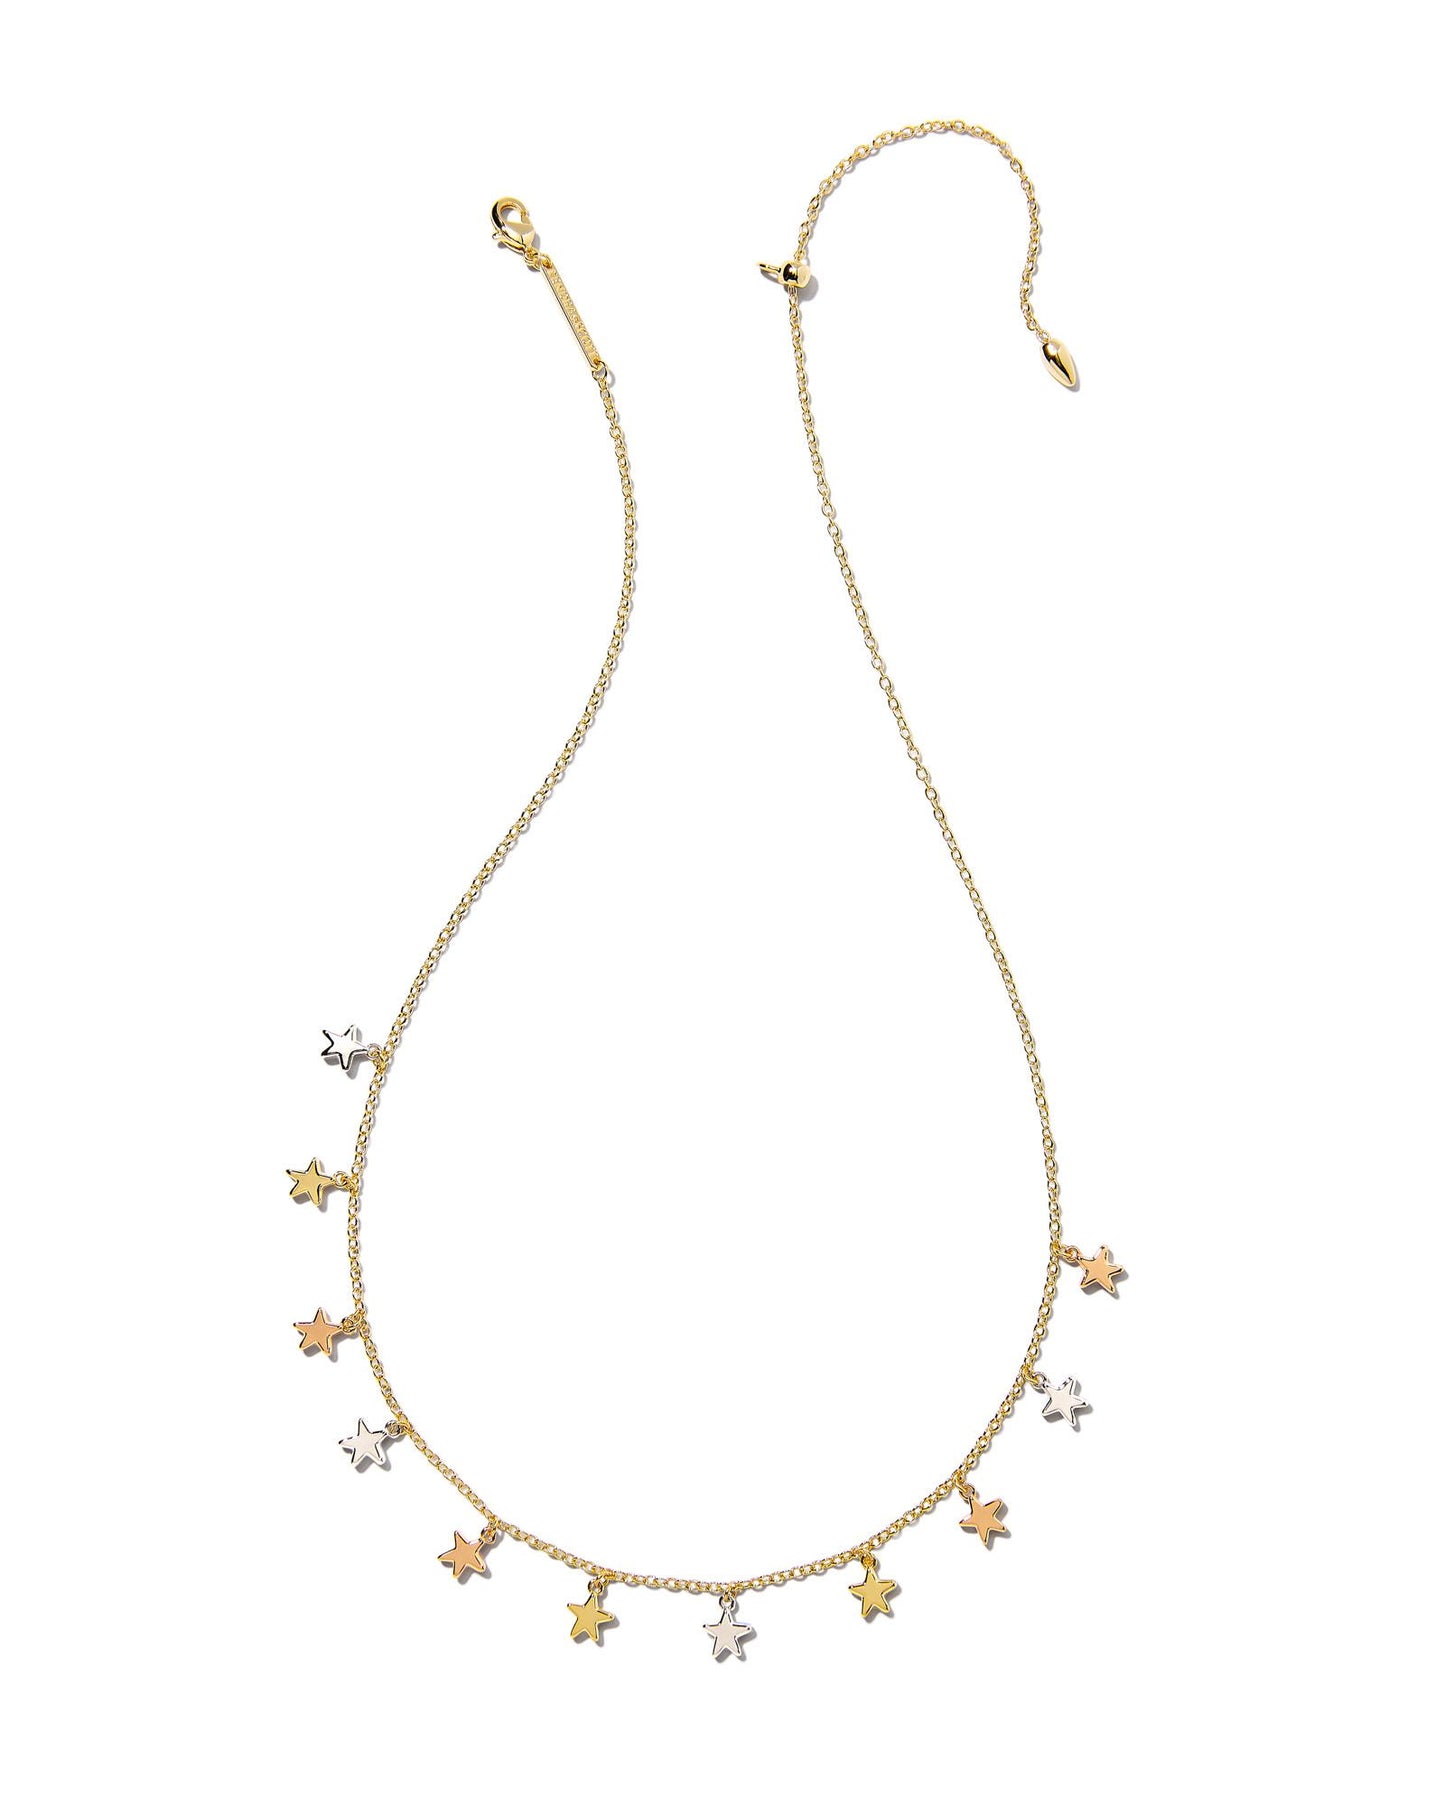 Kendra Scott Sloane Star Strand Necklace Mixed Metal-Necklaces-Kendra Scott-N1832MIX-The Twisted Chandelier